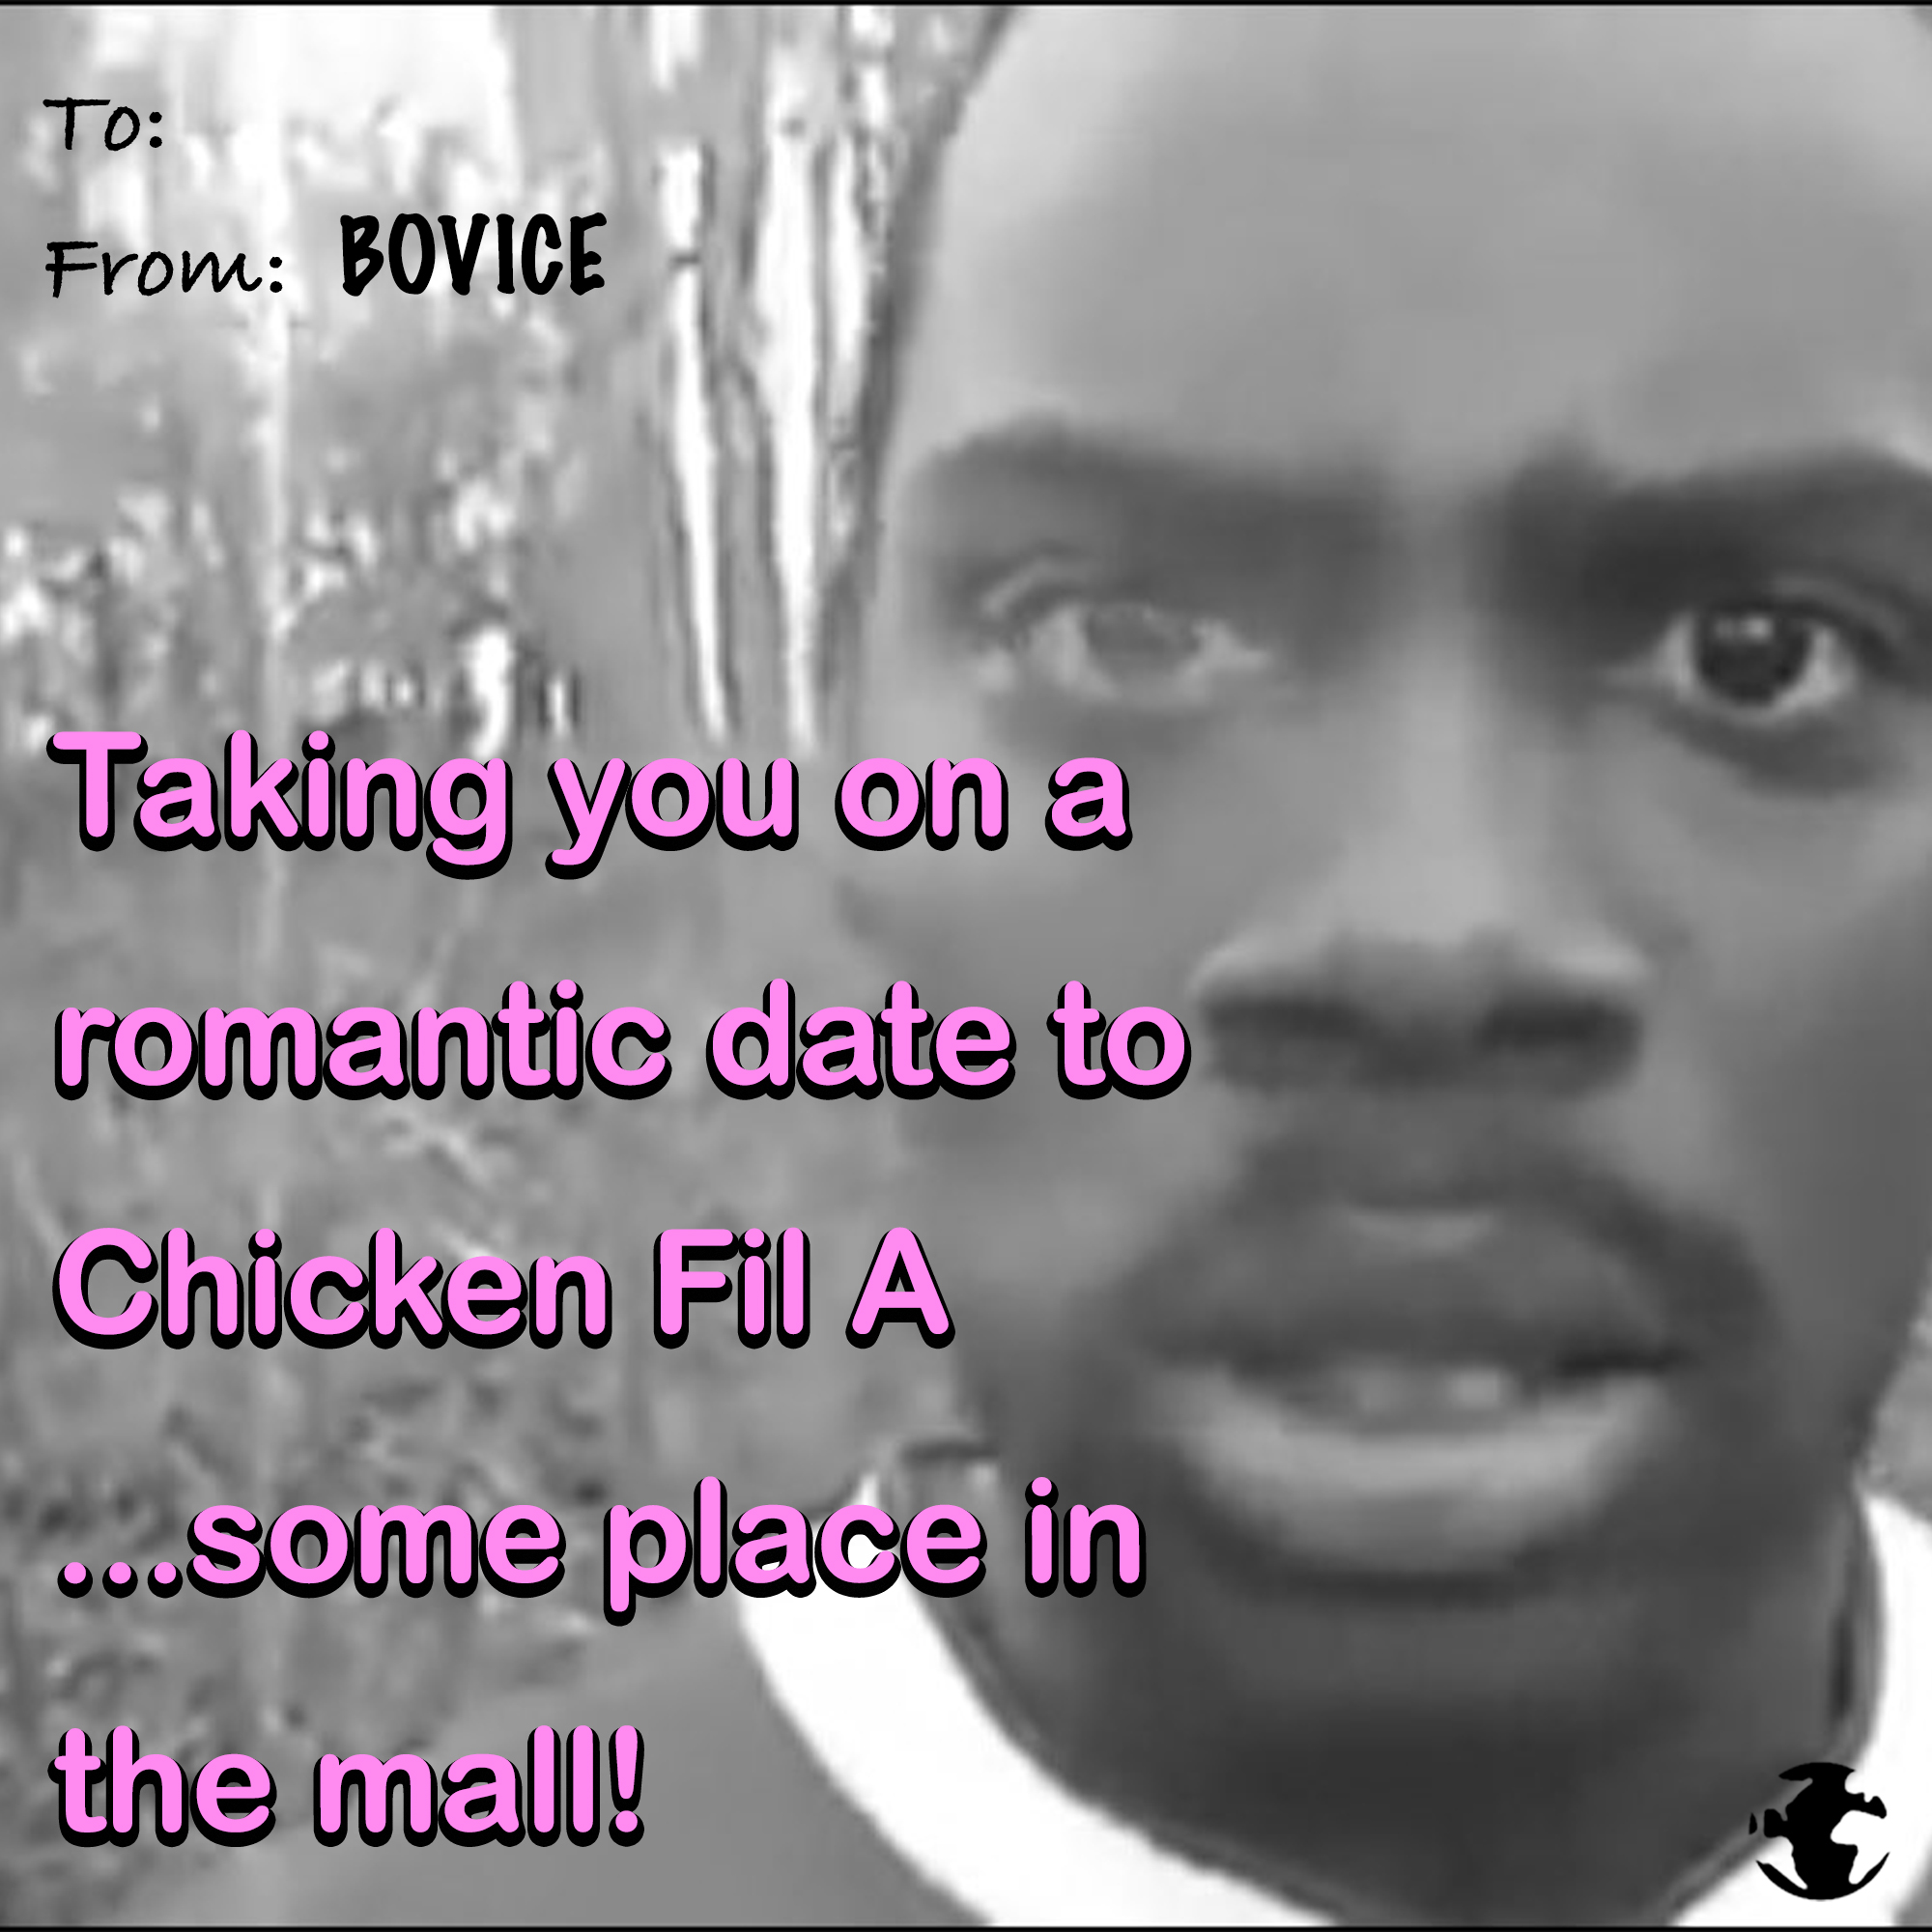 eBaum's Valentine's Day Cards 2022 - person - To From Bovice Taking you on a romantic date to Chicken Fil A Juusome place in the mall!